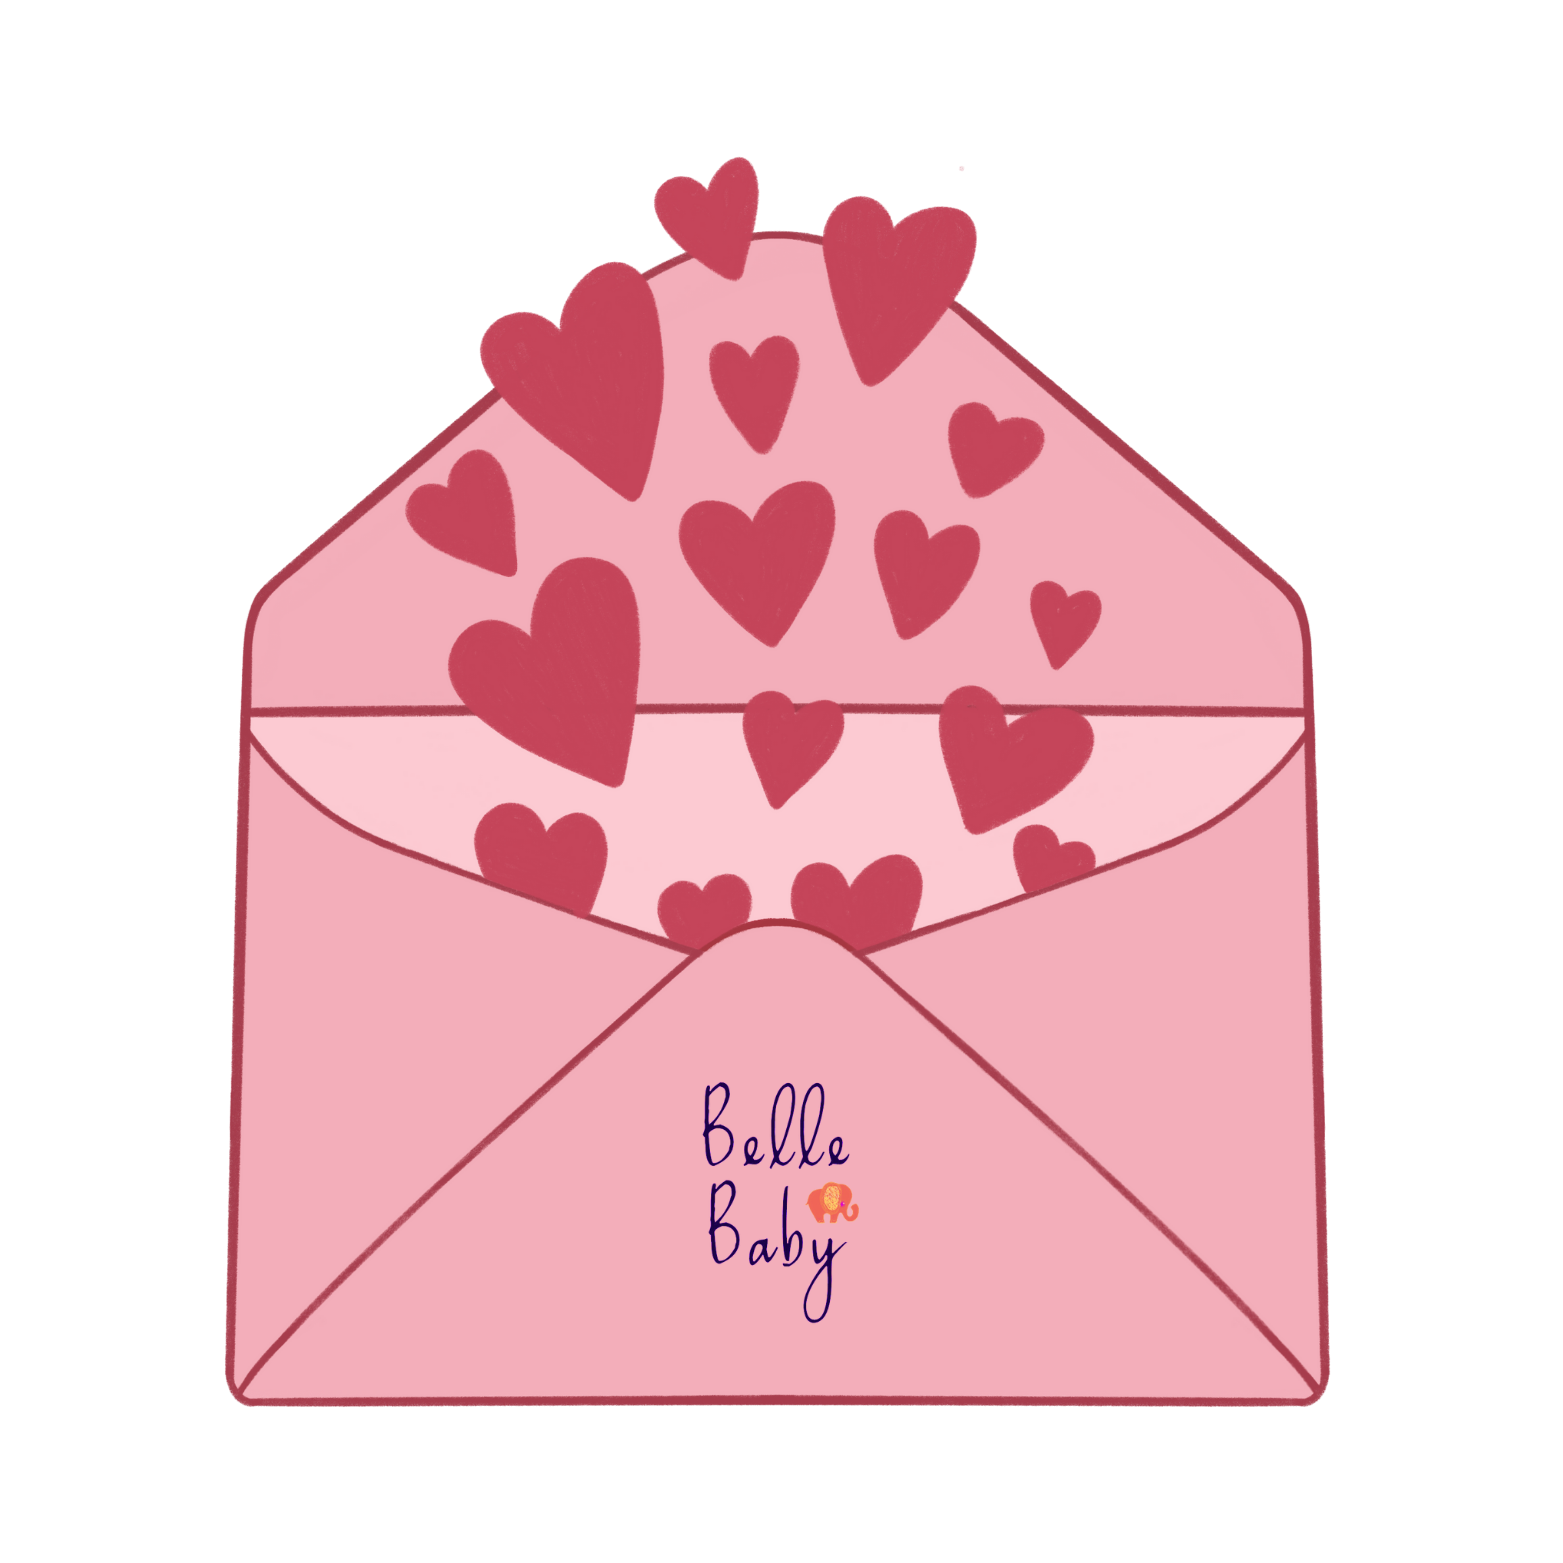 Belle baby mail delivered with love